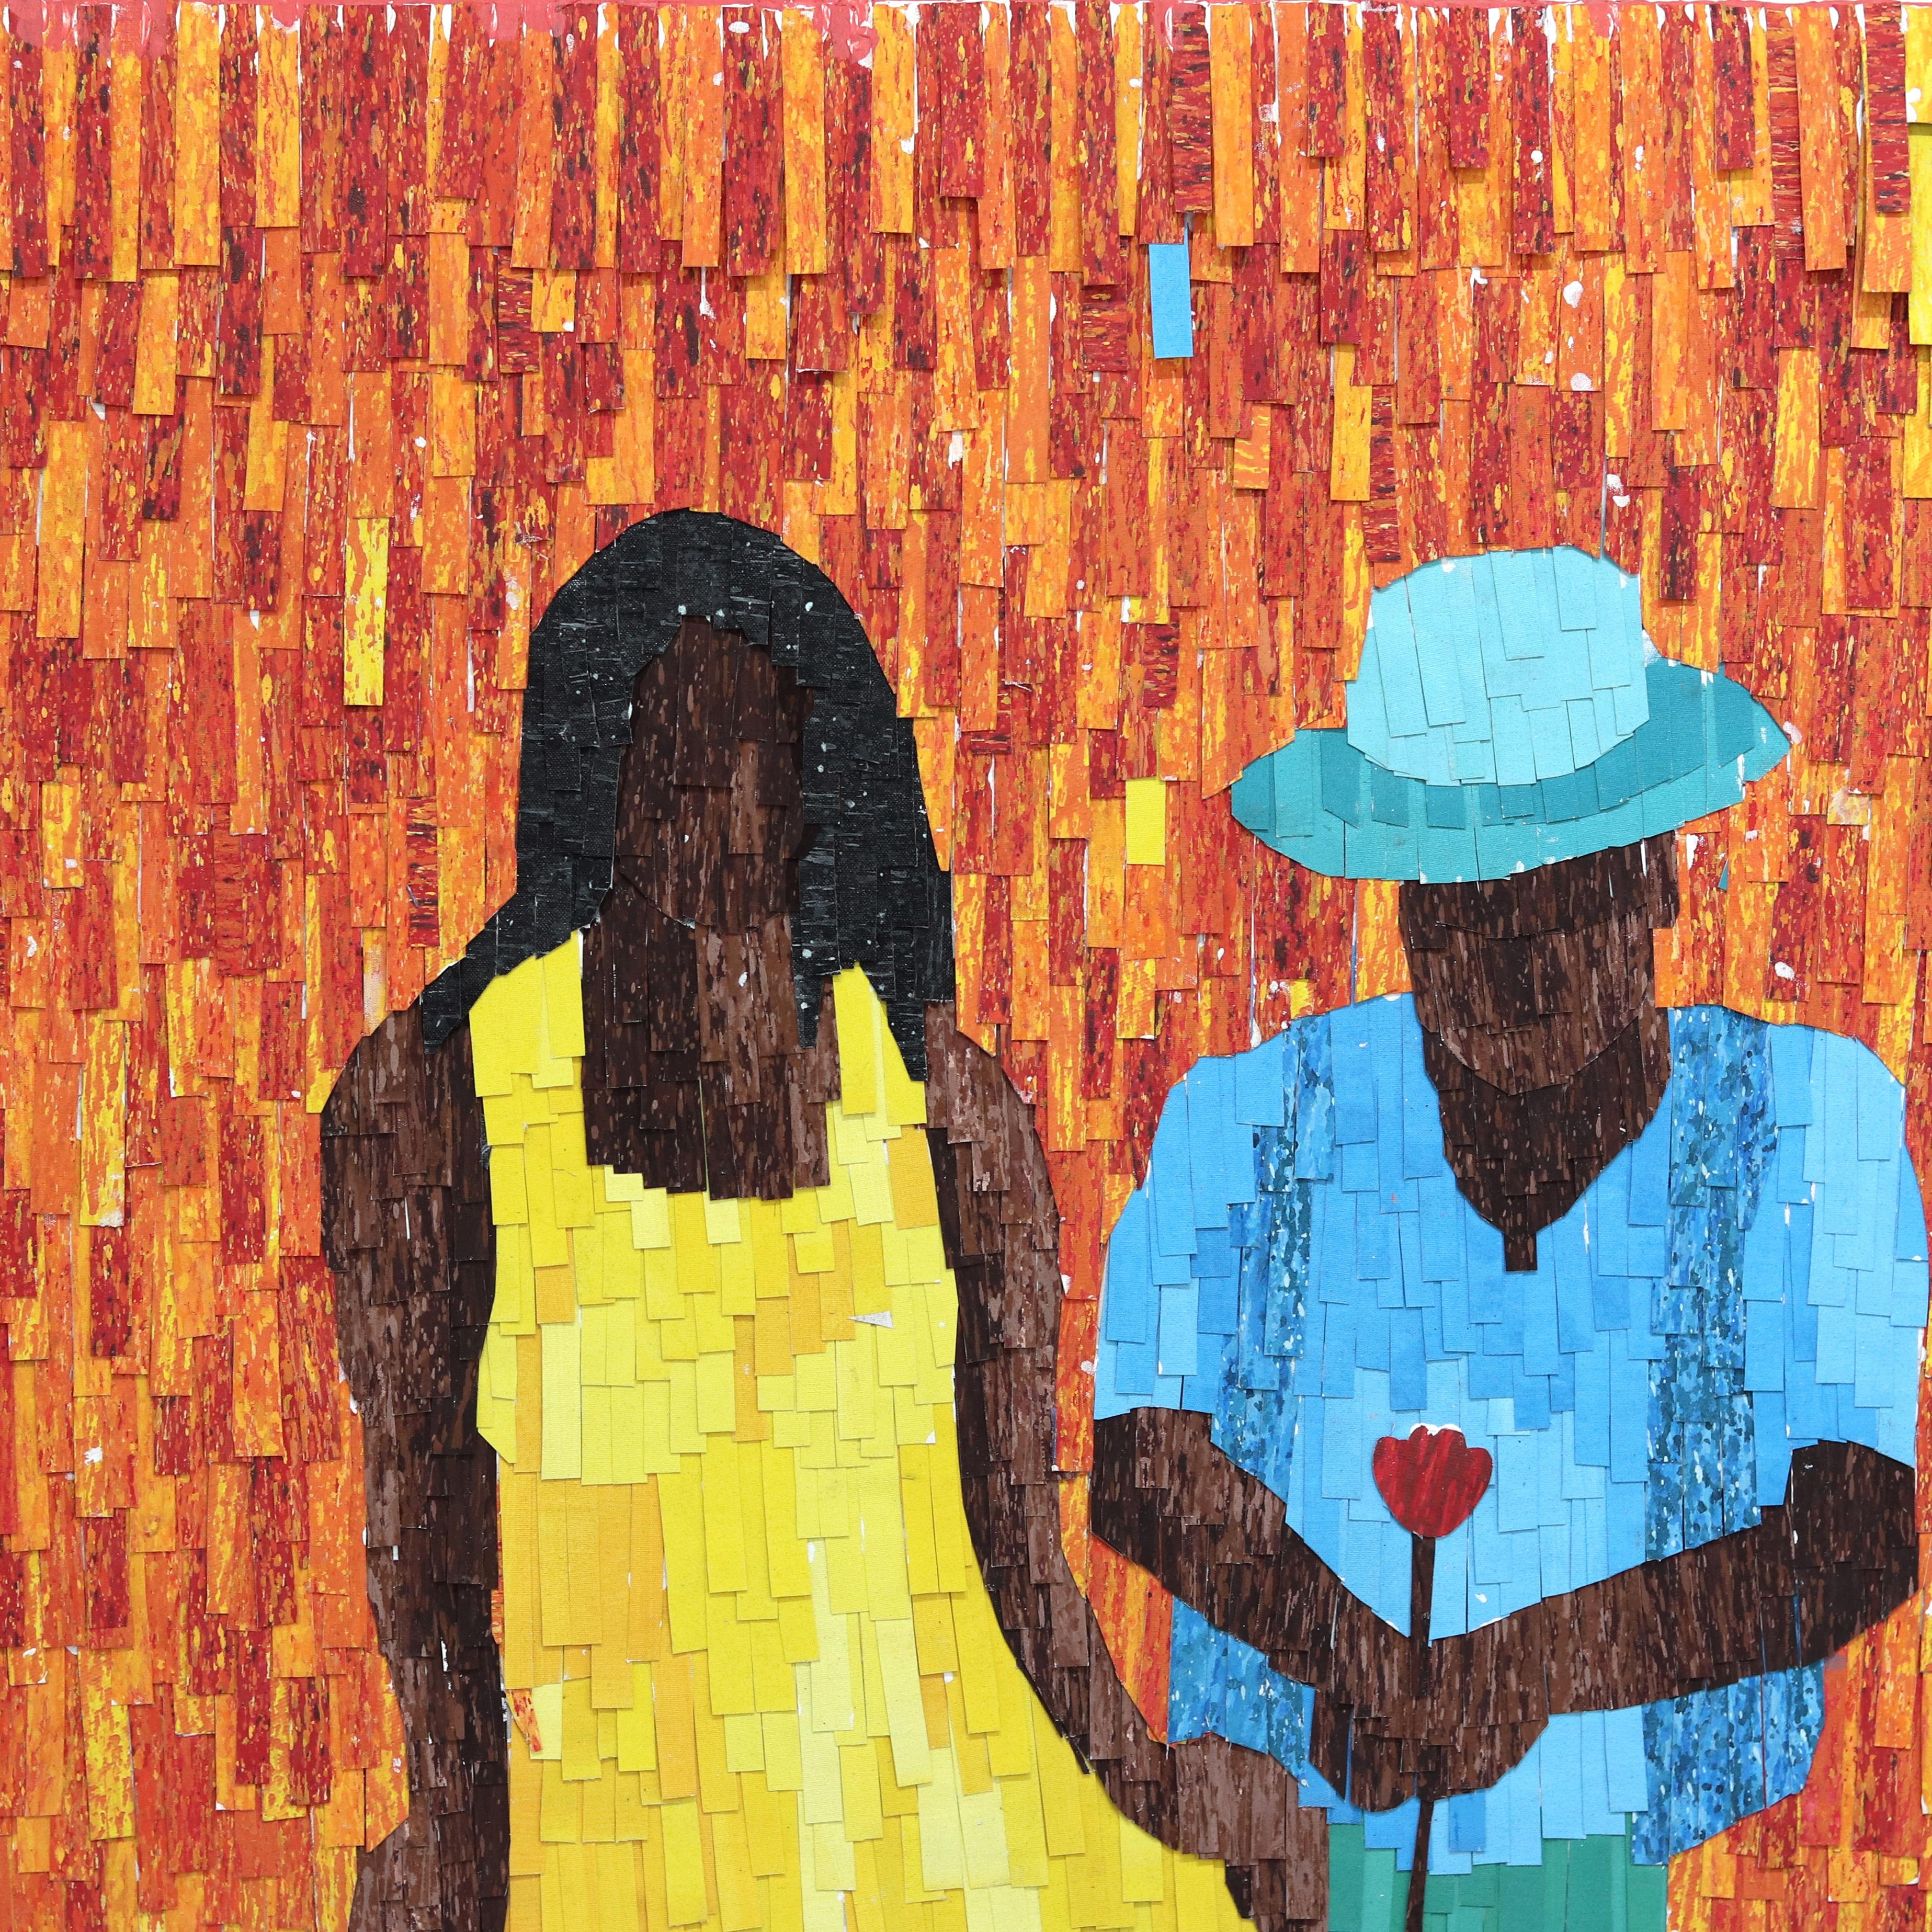 Red Roses - Large Textural Layered Painted Canvas Colorful Figurative Artwork - Contemporary Painting by Amadou Opa Bathily